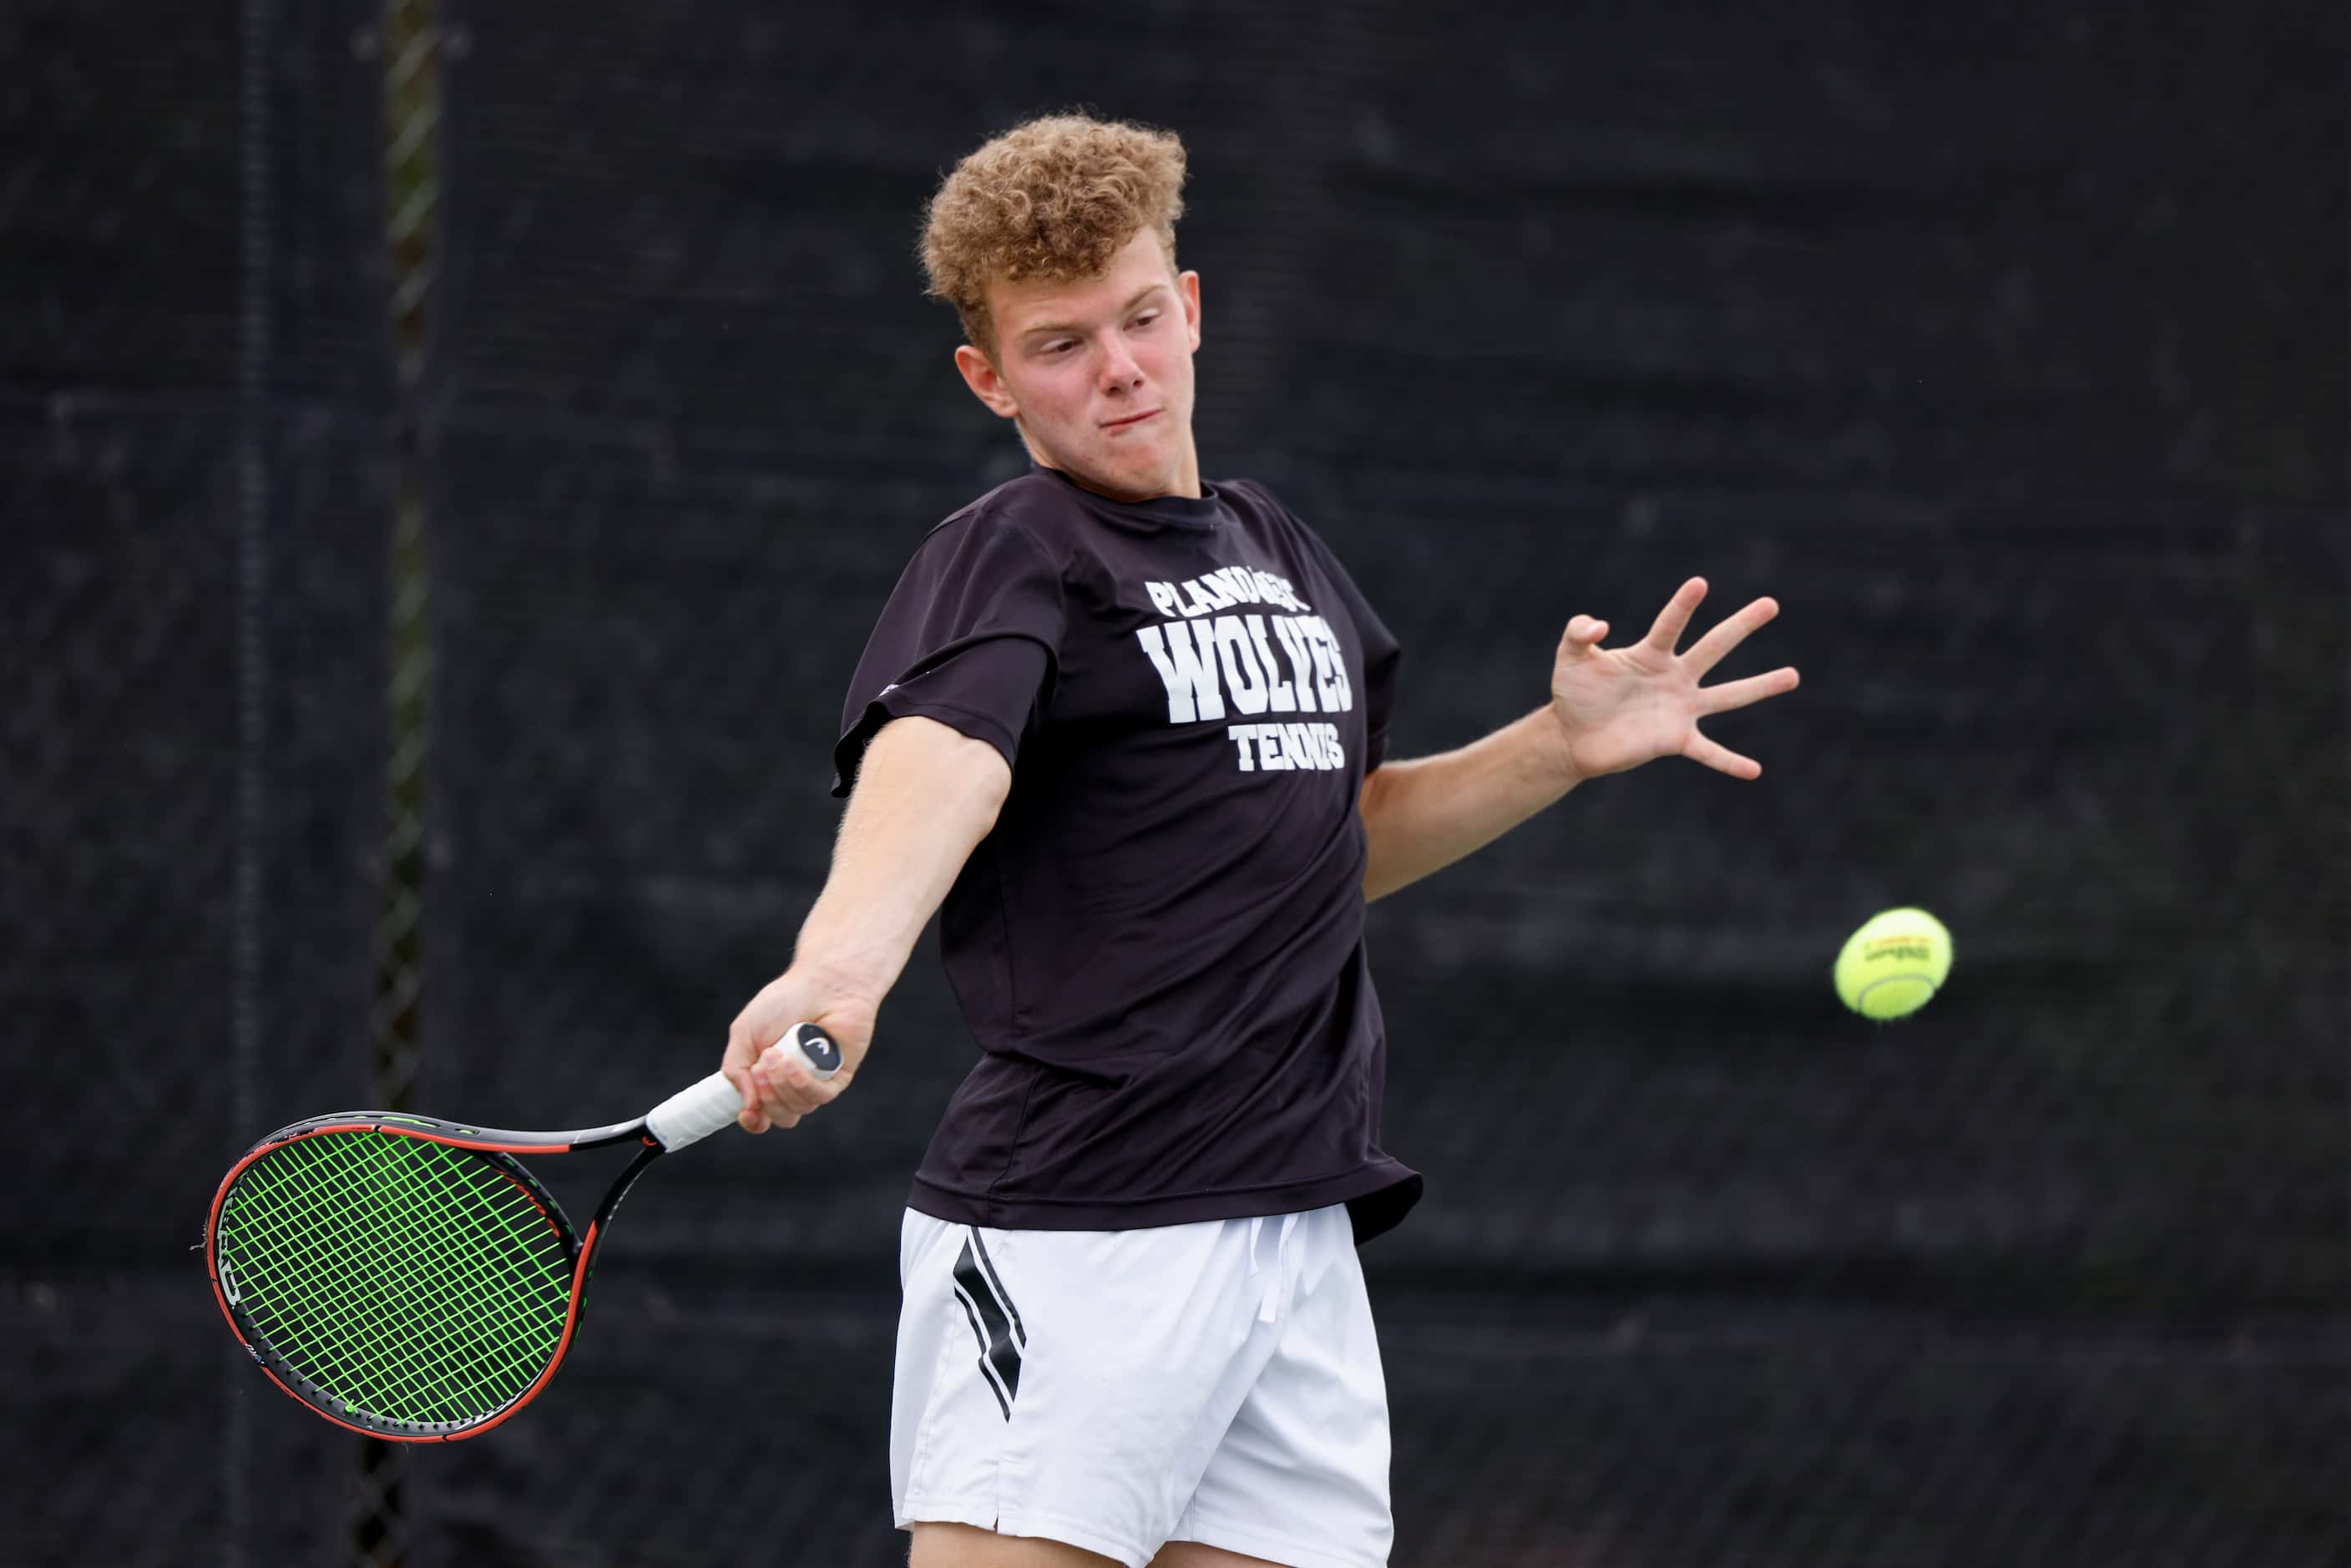 Plano West’s Dmitri Goubin hits a shot during the 6A mixed doubles championship match at the...